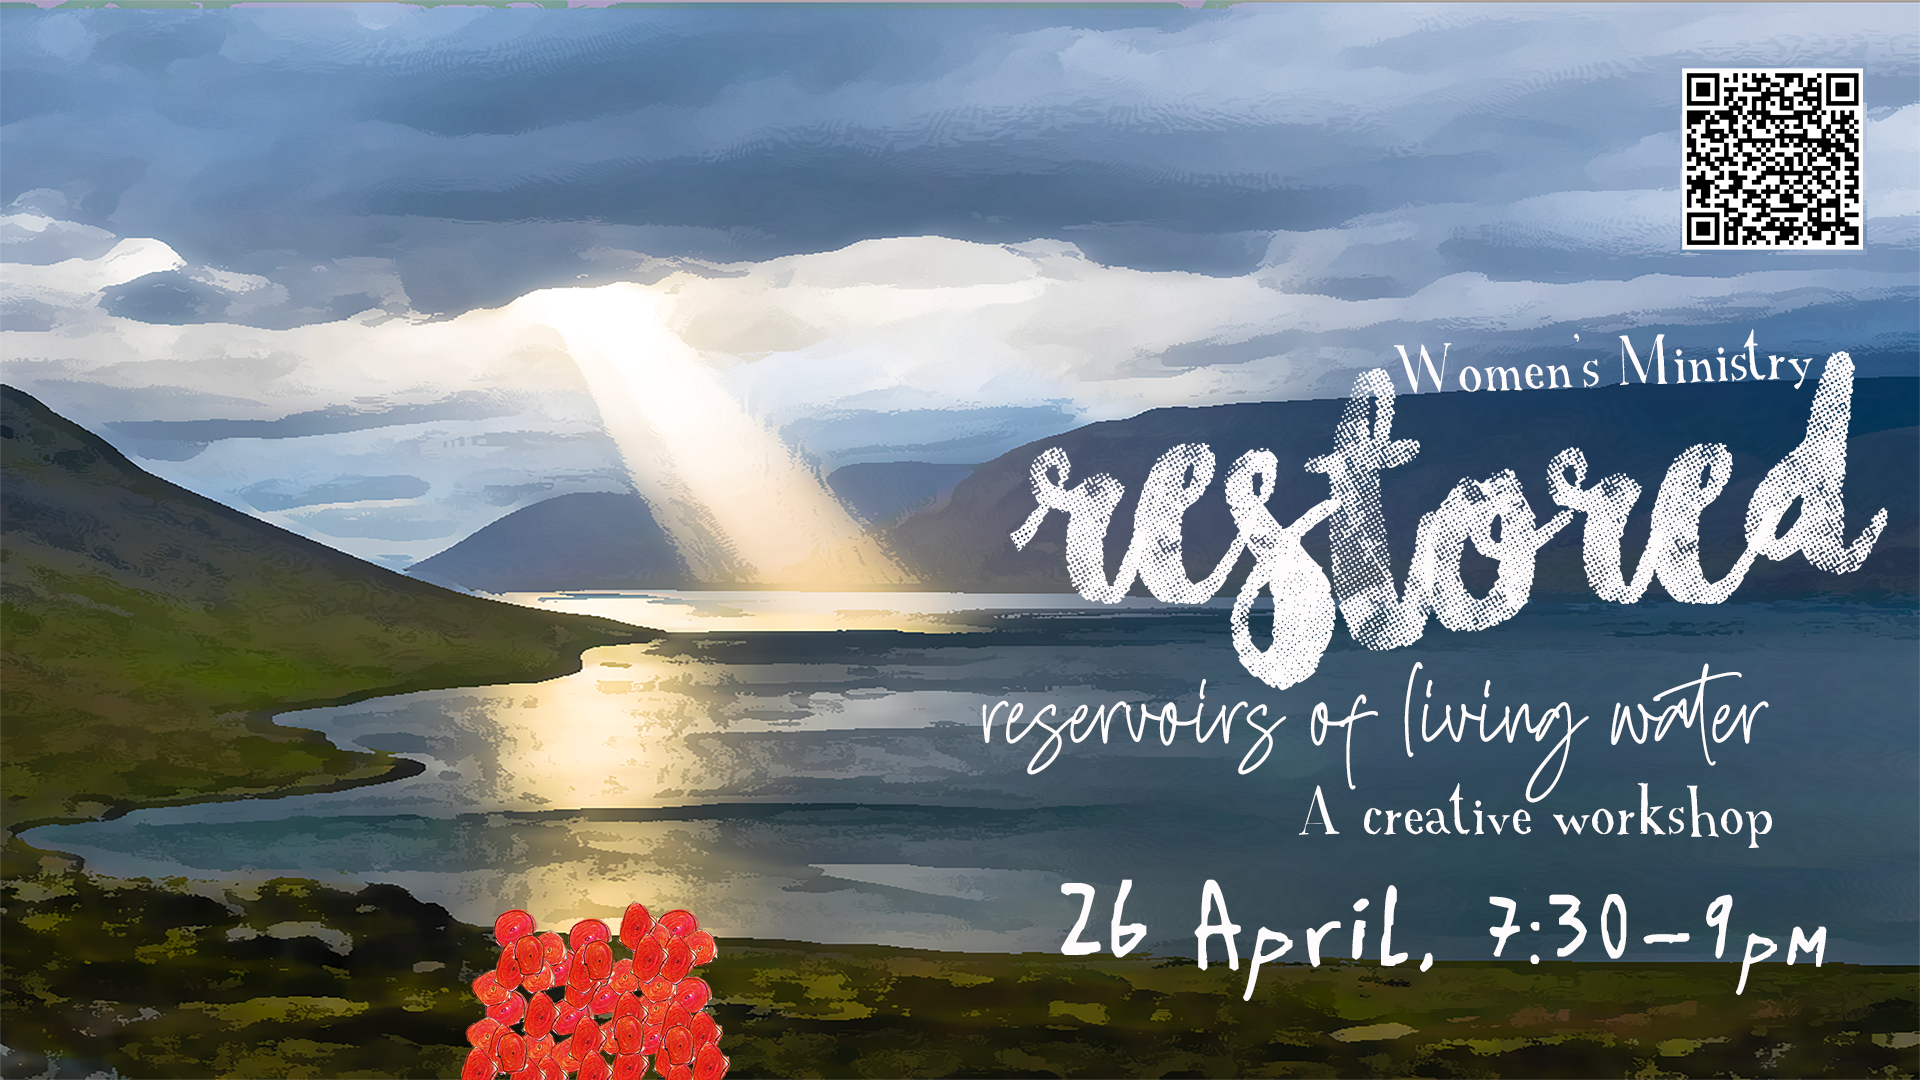 Restored - Reservoirs of Living Water